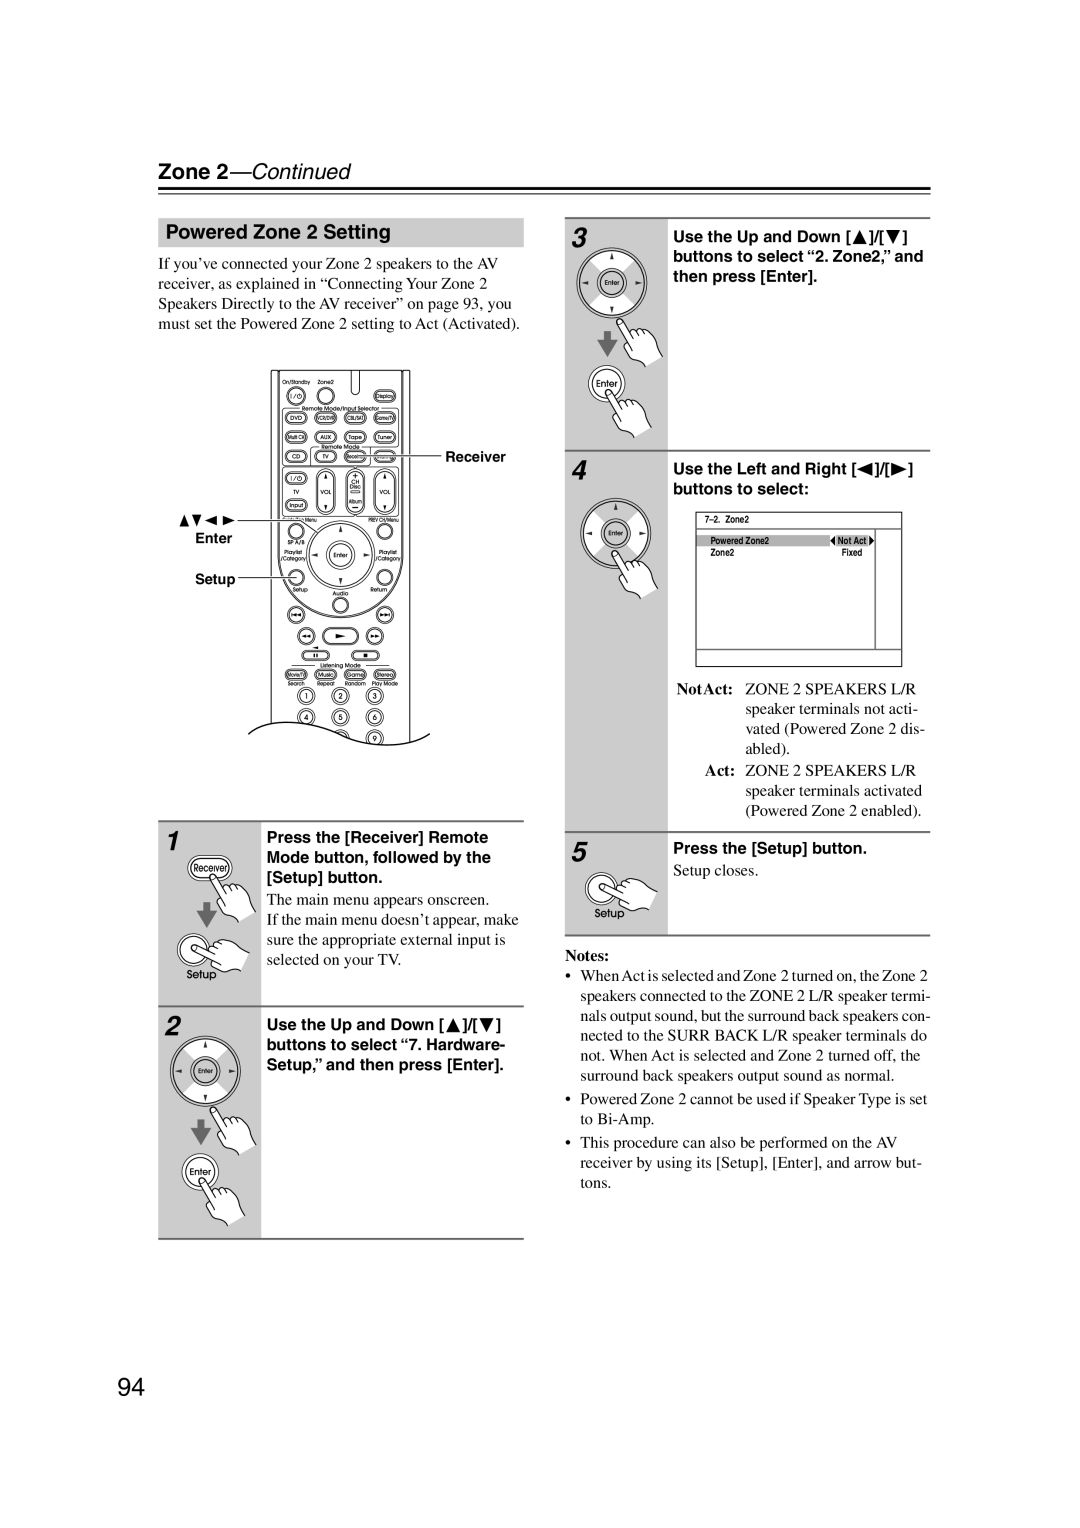 Integra DTR-5.9 instruction manual Zone 2—Continued, Powered Zone 2 Setting, Setup closes, Notes 